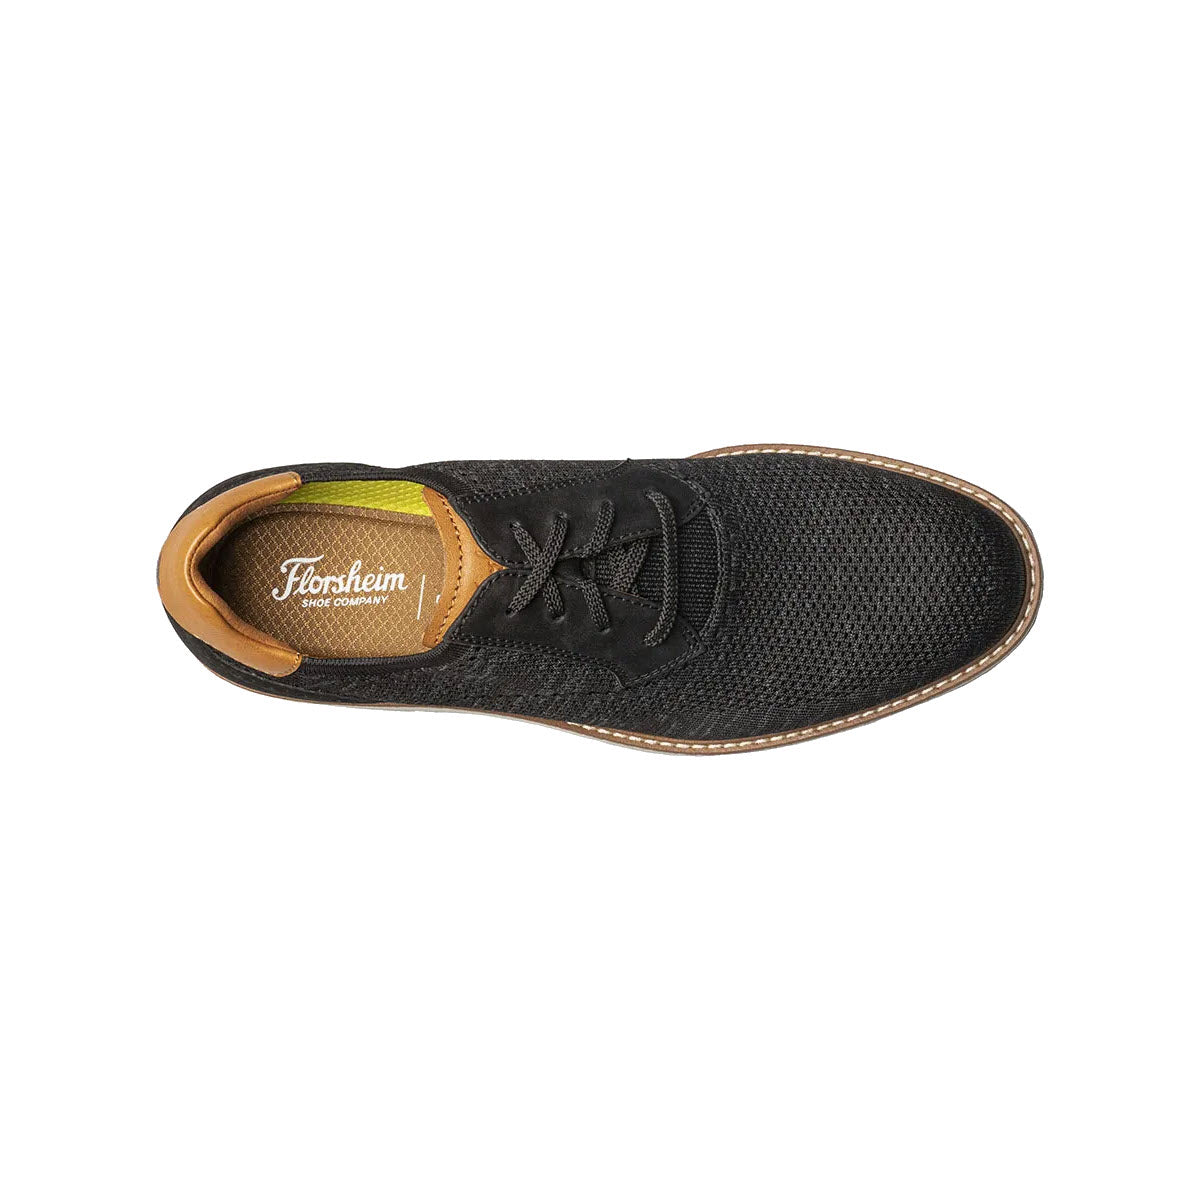 Florsheim FLORSHEIM VIBE KNIT PLAIN TOE OXFORD BLACK - MENS knit oxford casual shoe with laces, viewed from above on a white background.